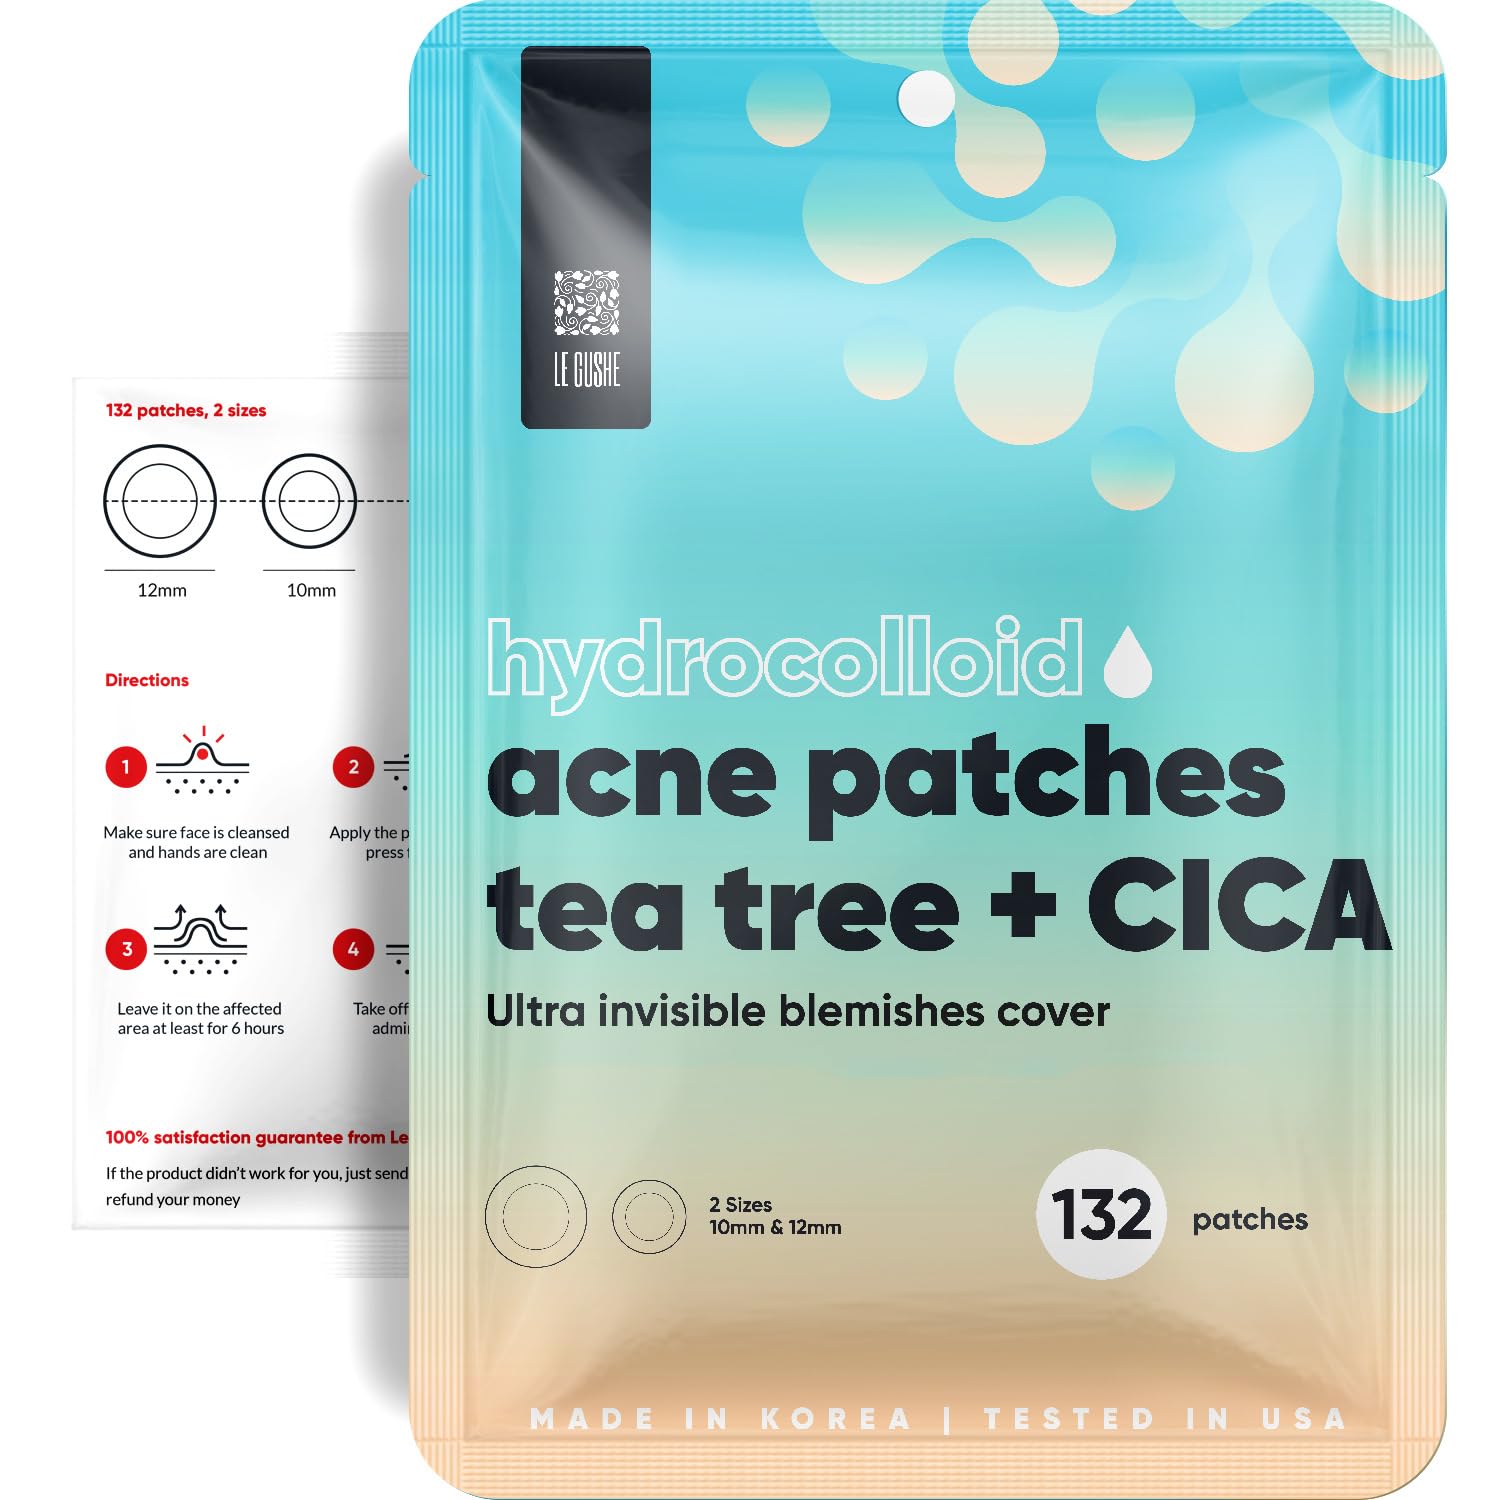 LE GUSHE K-BEAUTY Pimple Patches for Face (132 dots) - Hydrocolloid Acne Patch for Zits and Blemishes S&S $10.76